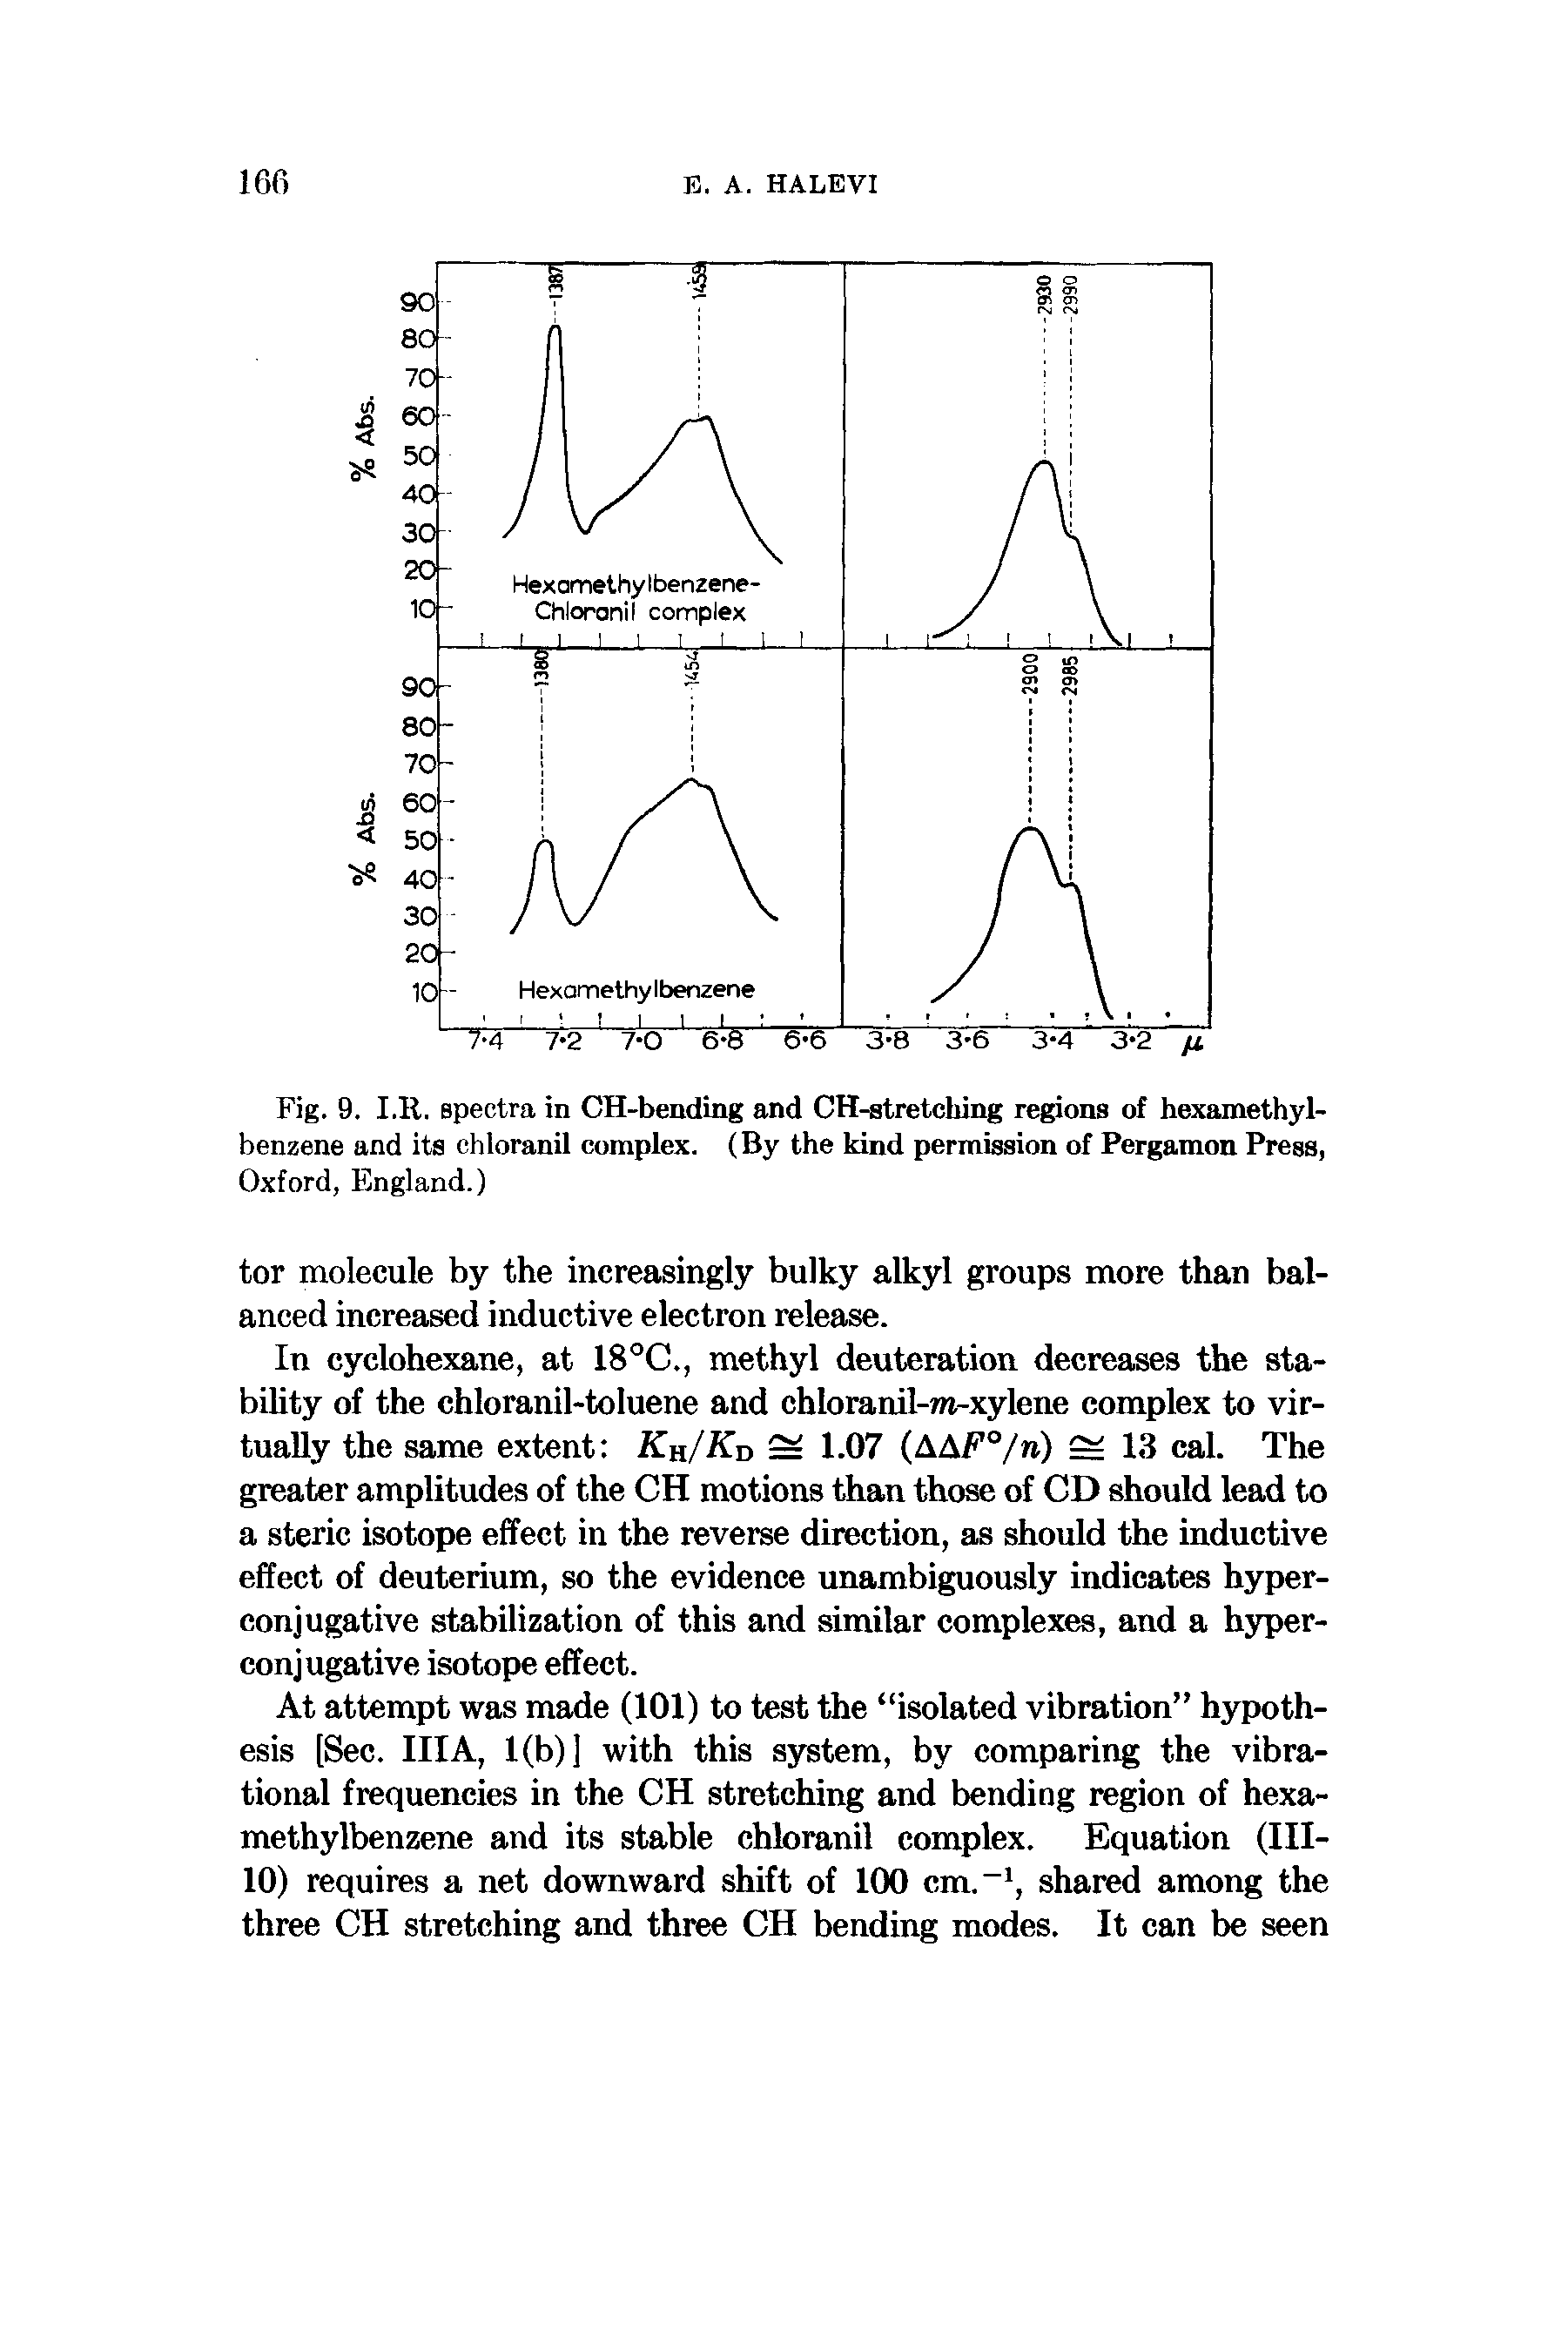 Fig. 9. I.ll. spectra in CH-bending and CH-stretching regions of hexamethyl-benzene and its chloranil complex. (By the kind permission of Pergamon Press, Oxford, England.)...